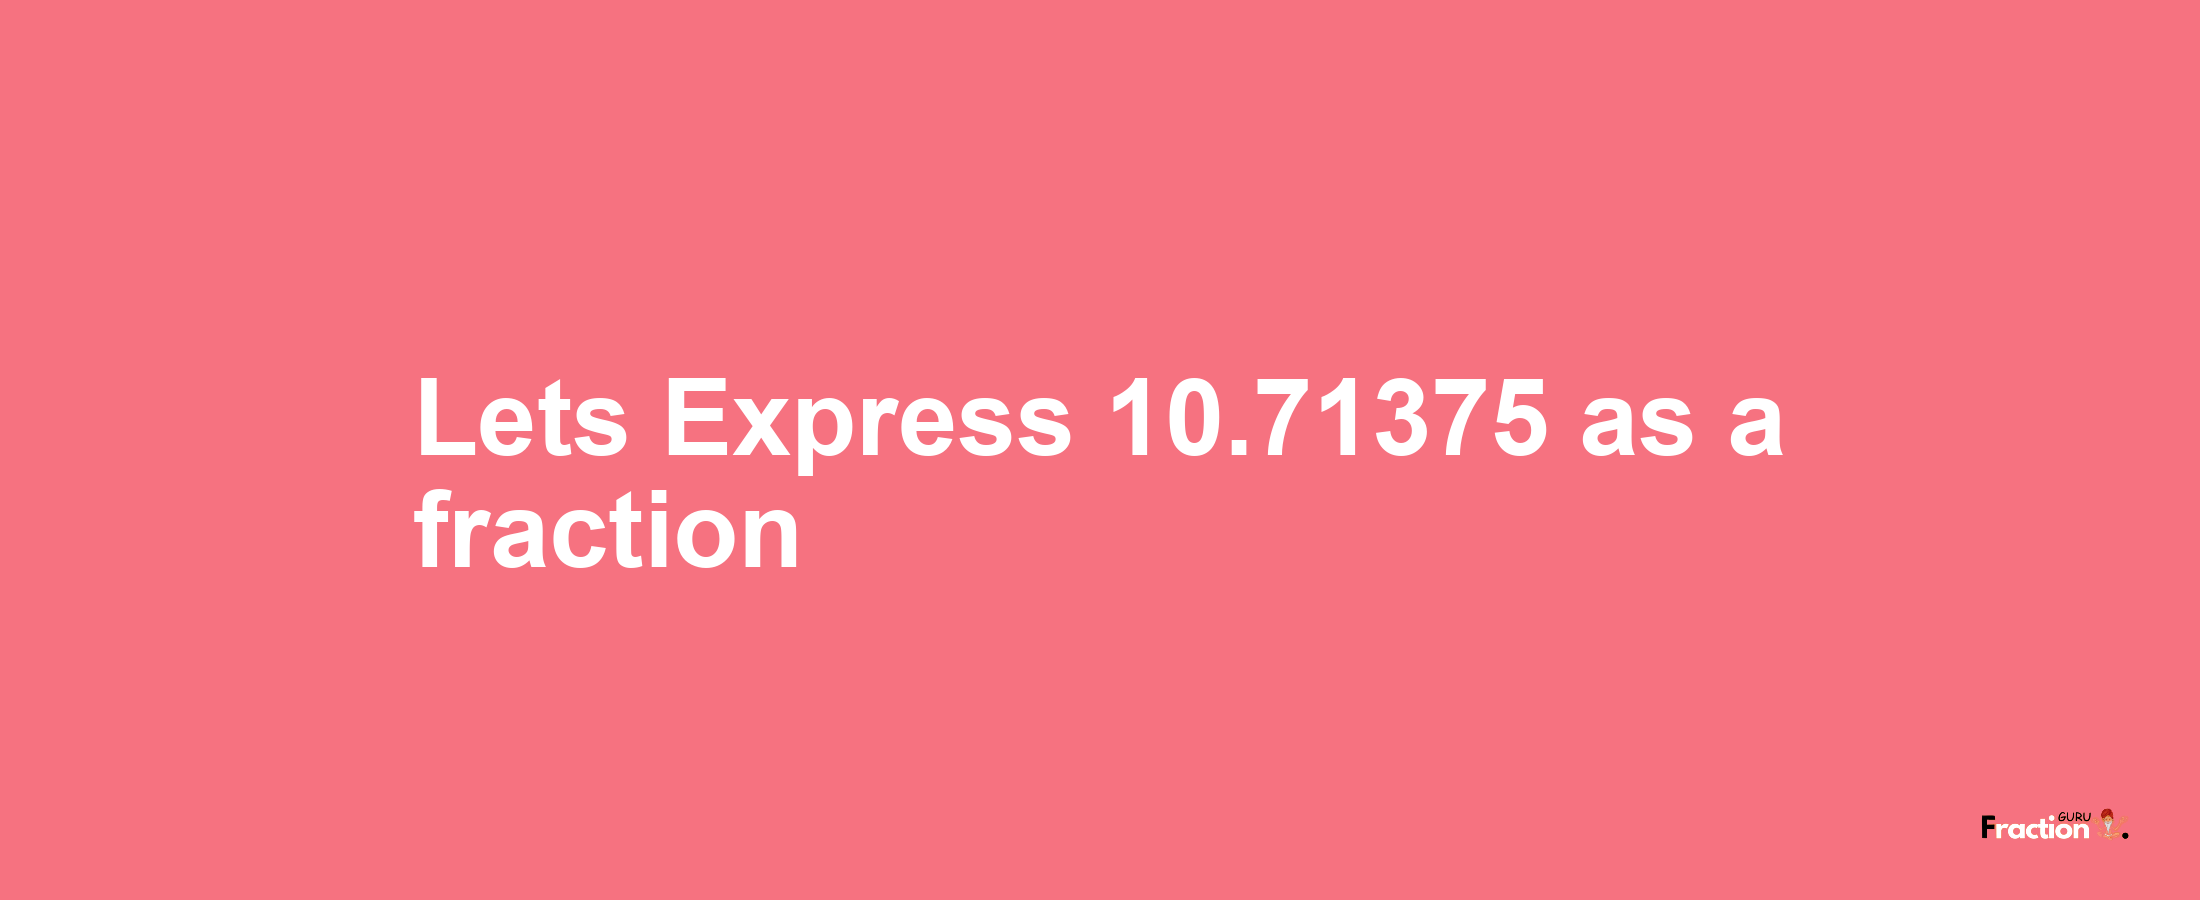 Lets Express 10.71375 as afraction